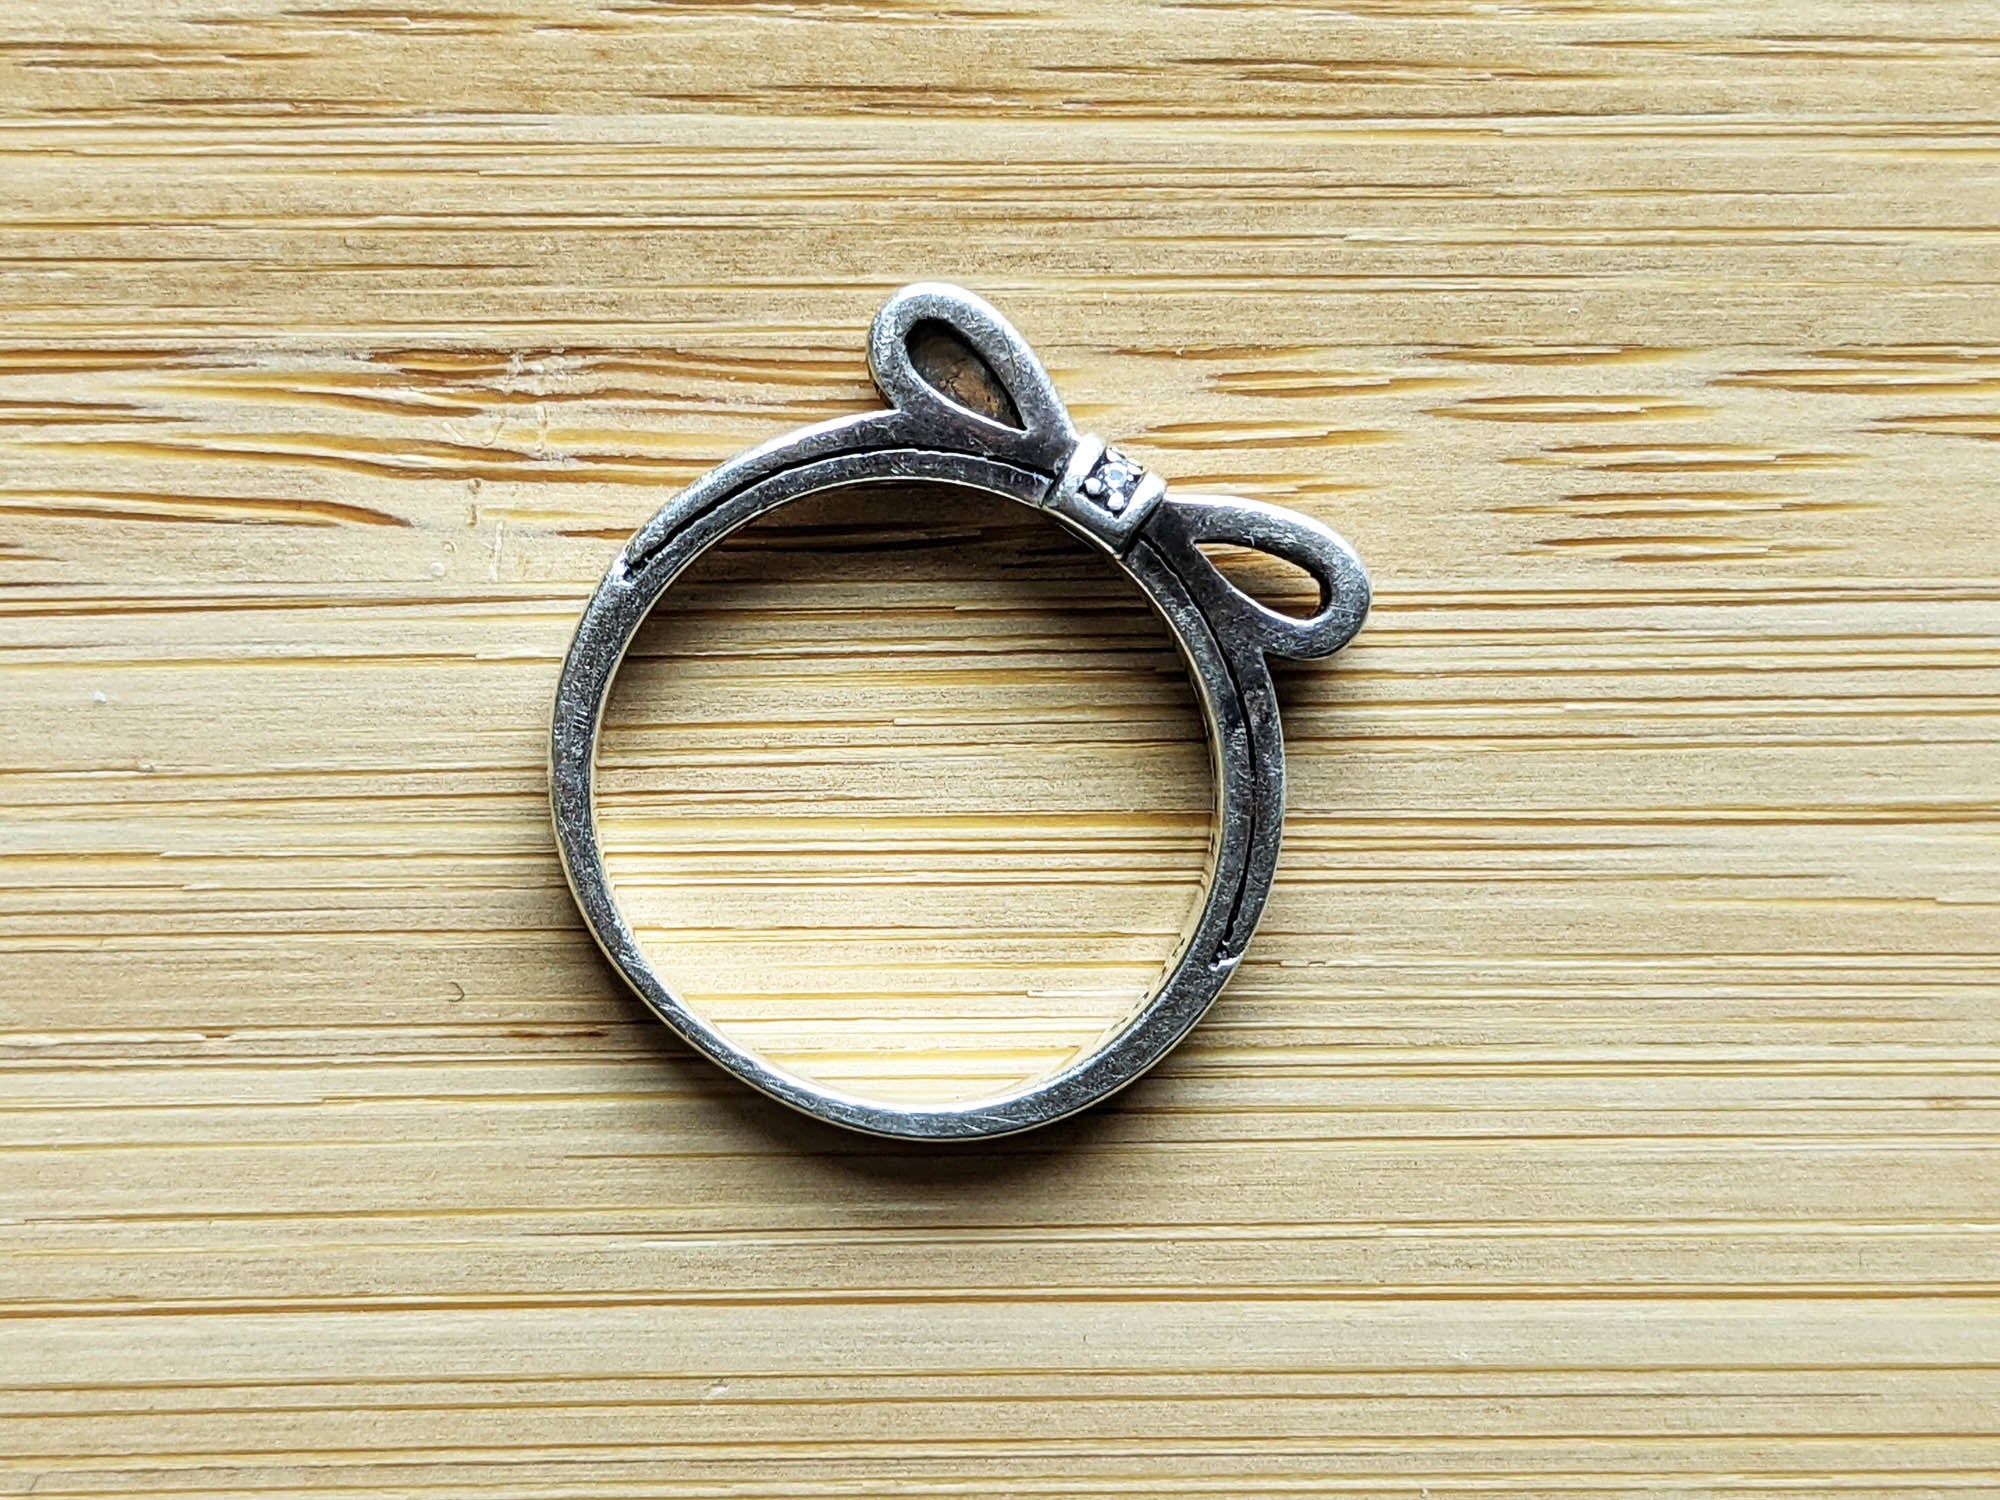 A silver ring on a light-colored wooden table.